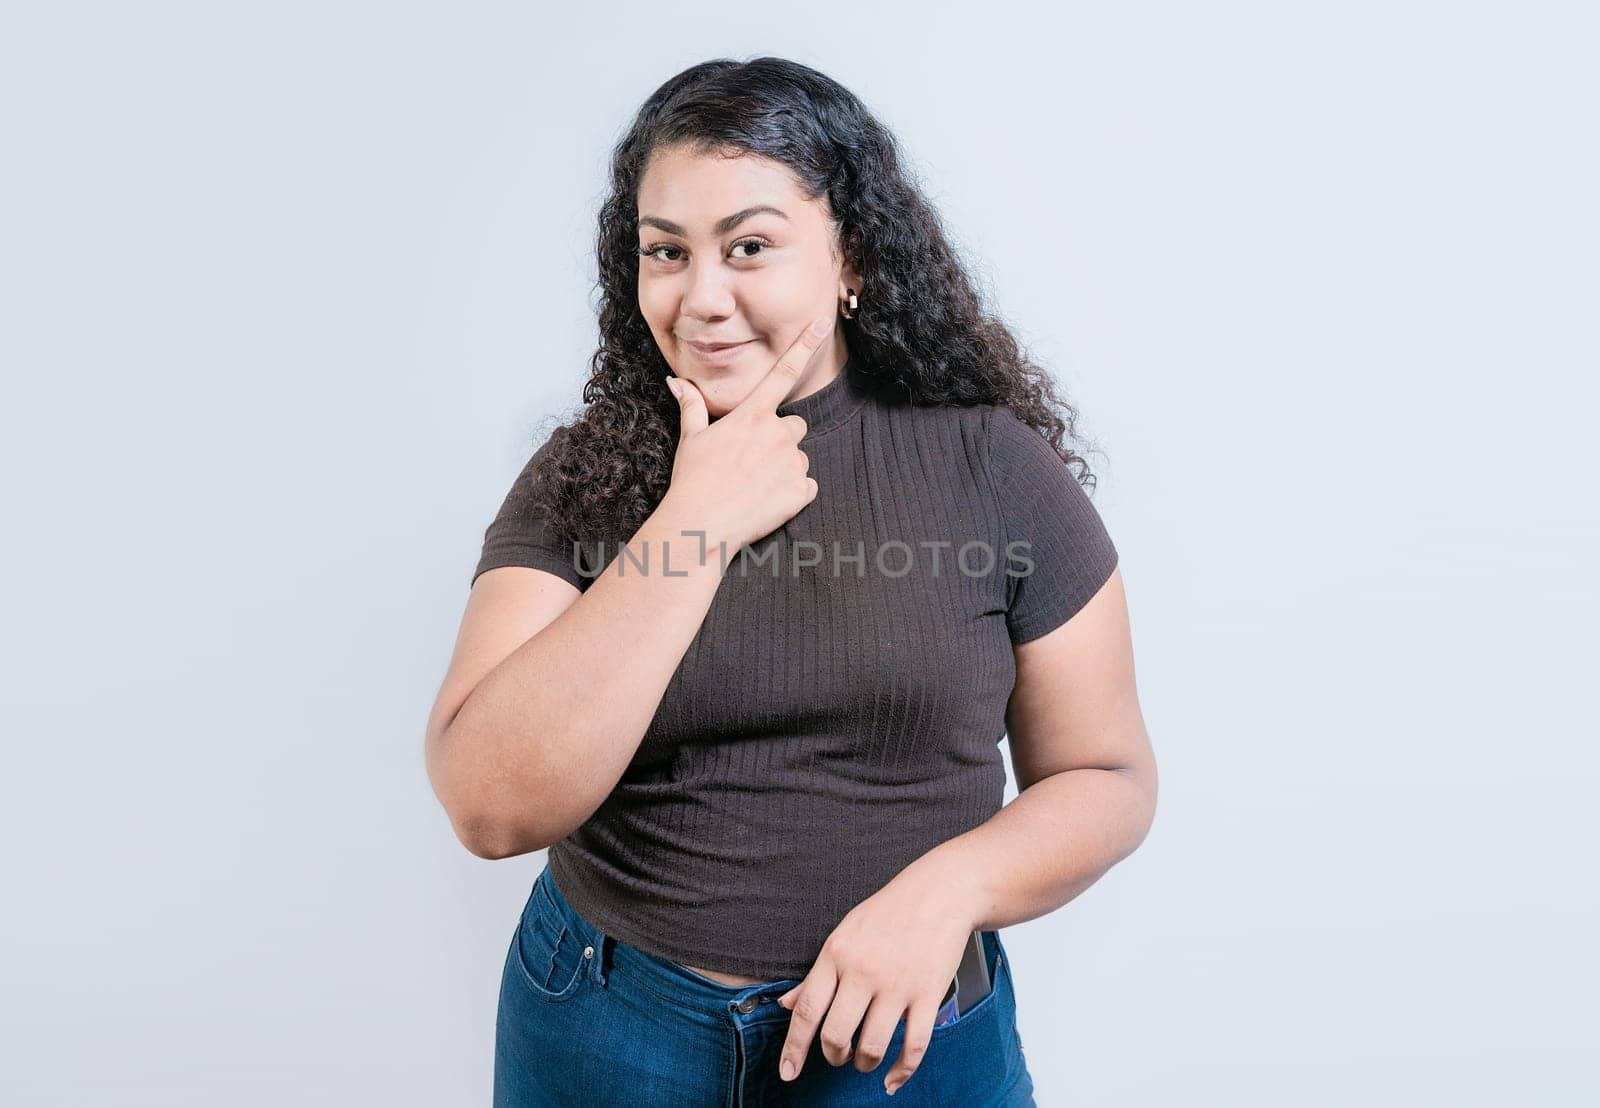 Beautiful latin girl thinking with hand on chin. Young woman rubbing chin with a doubtful expression by isaiphoto